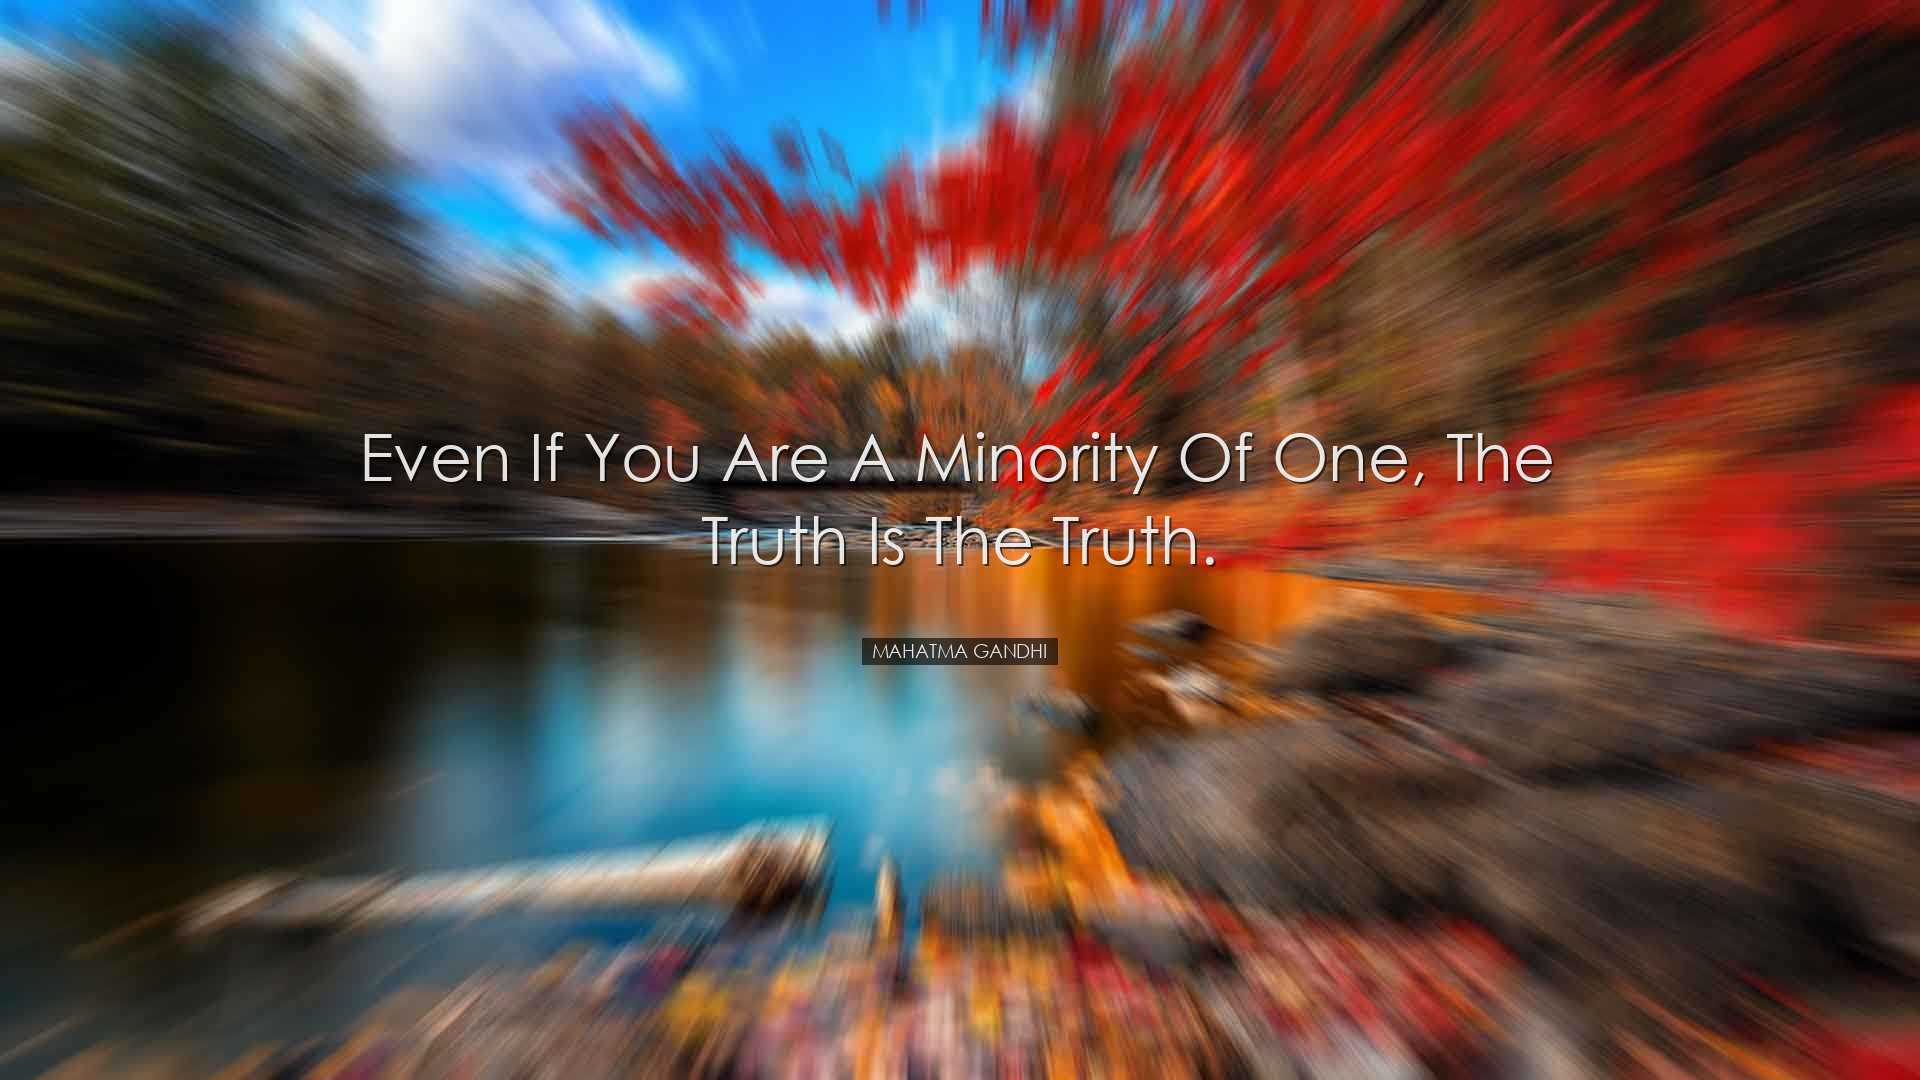 Even if you are a minority of one, the truth is the truth. - Mahat